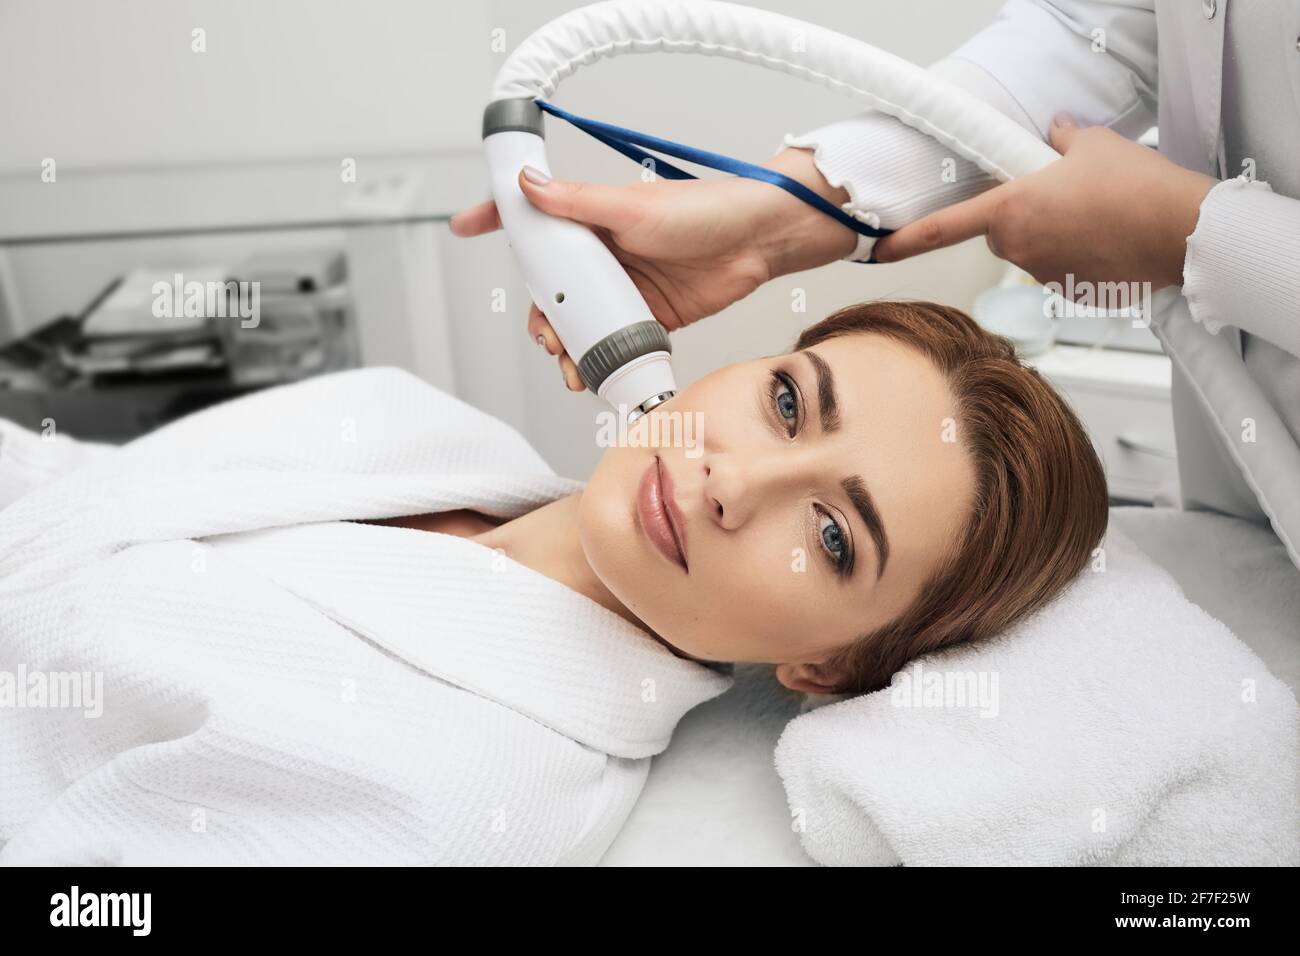 Cosmetologist doing an acoustic wave therapy for woman's face. Skin rejuvenation with acoustic waves, close-up Stock Photo